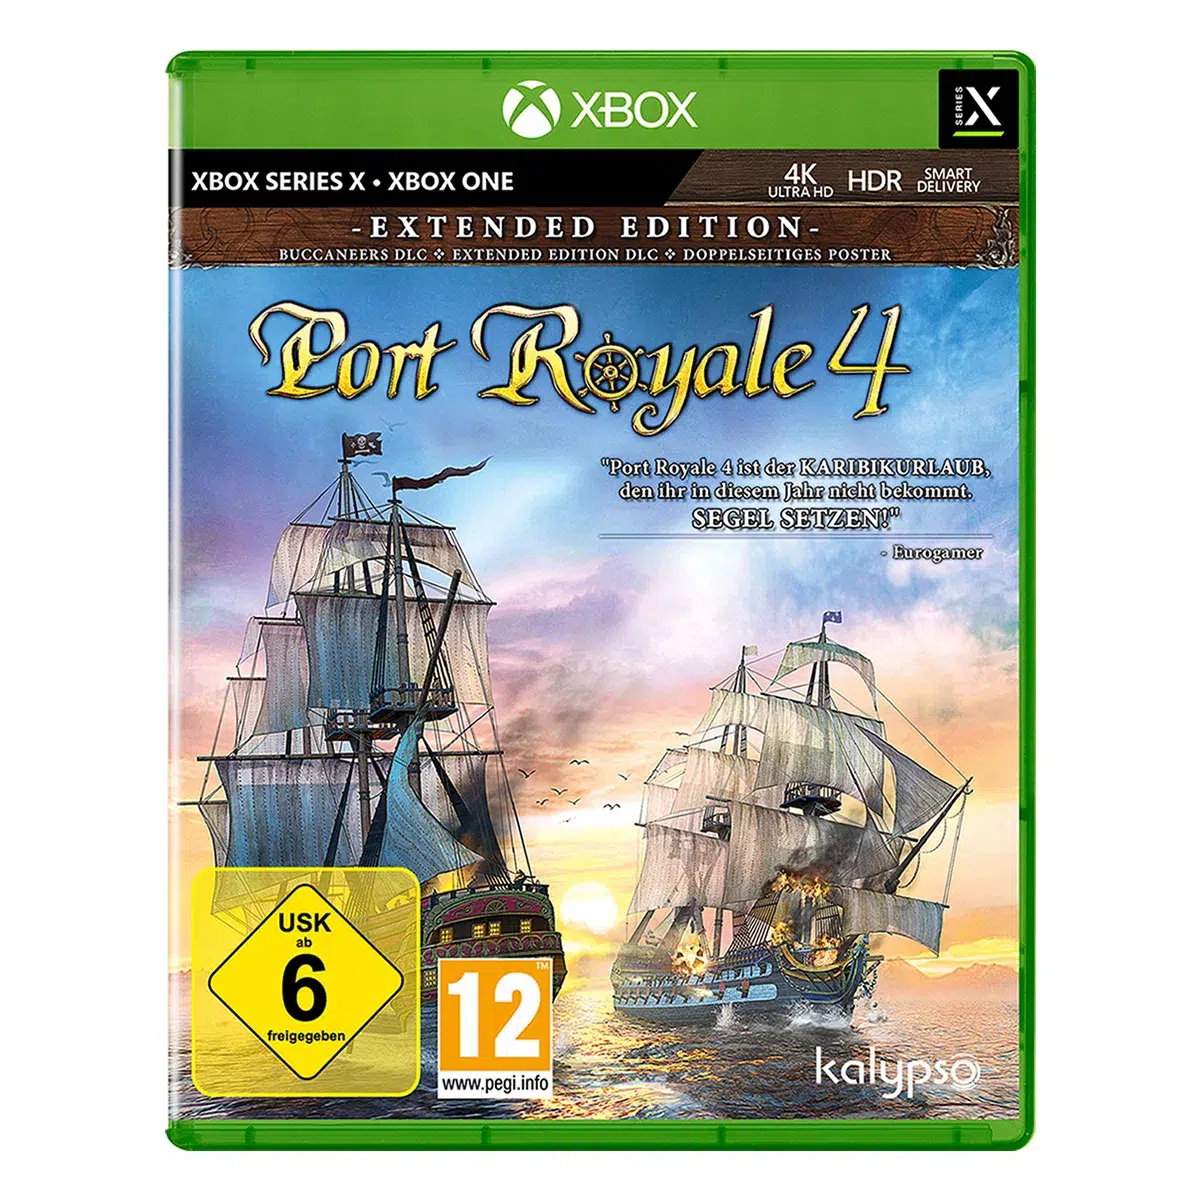 Port Royale 4 - Extended Edition - XSRX